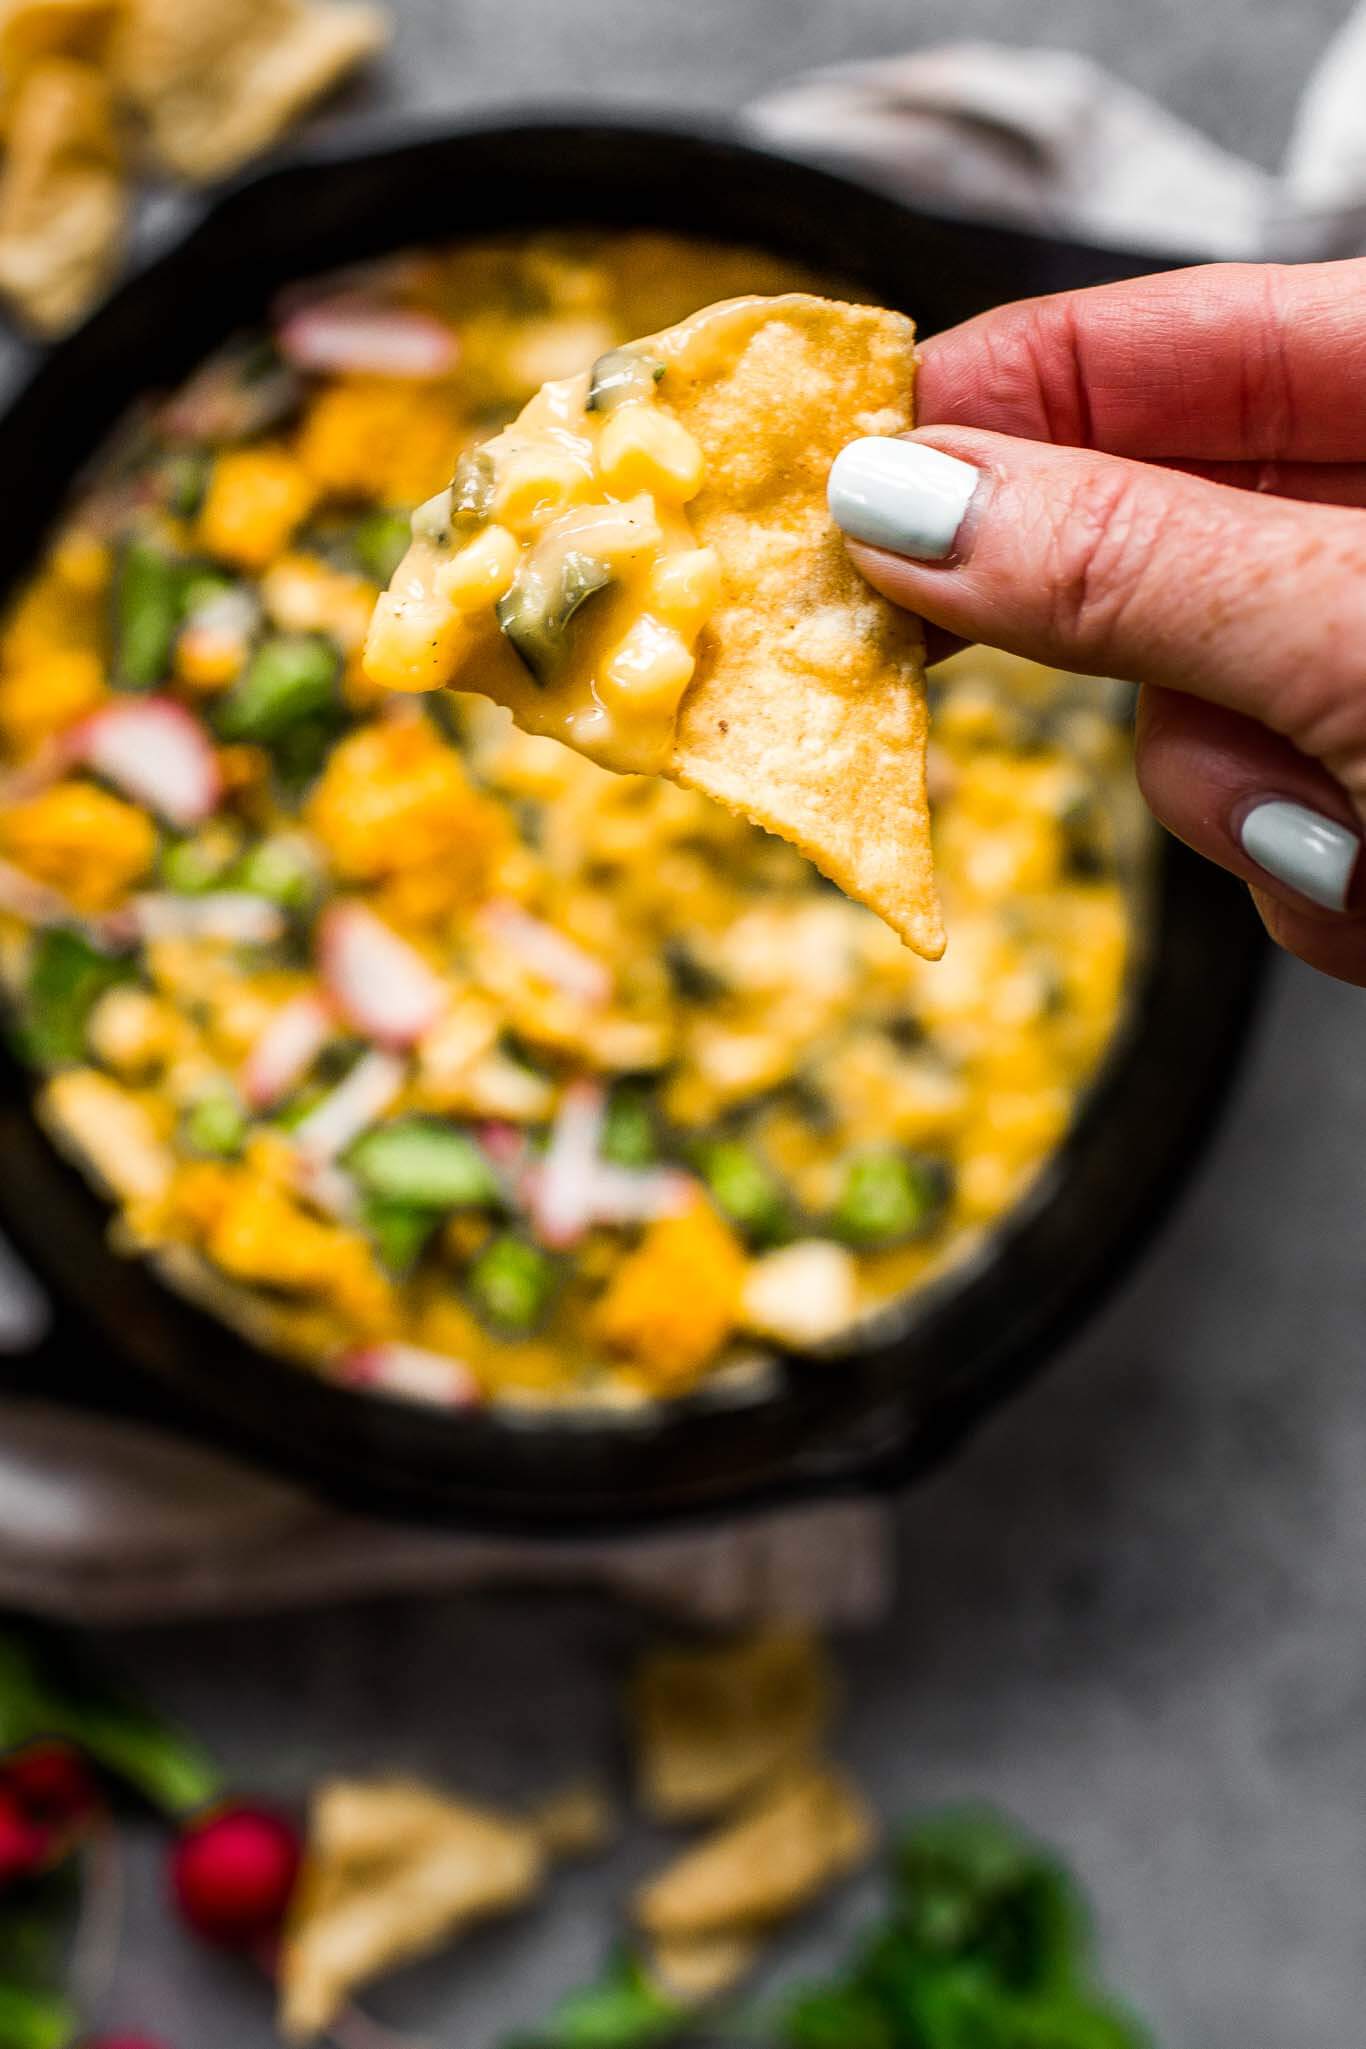 Hand holding tortilla chip dipped into corn queso dip